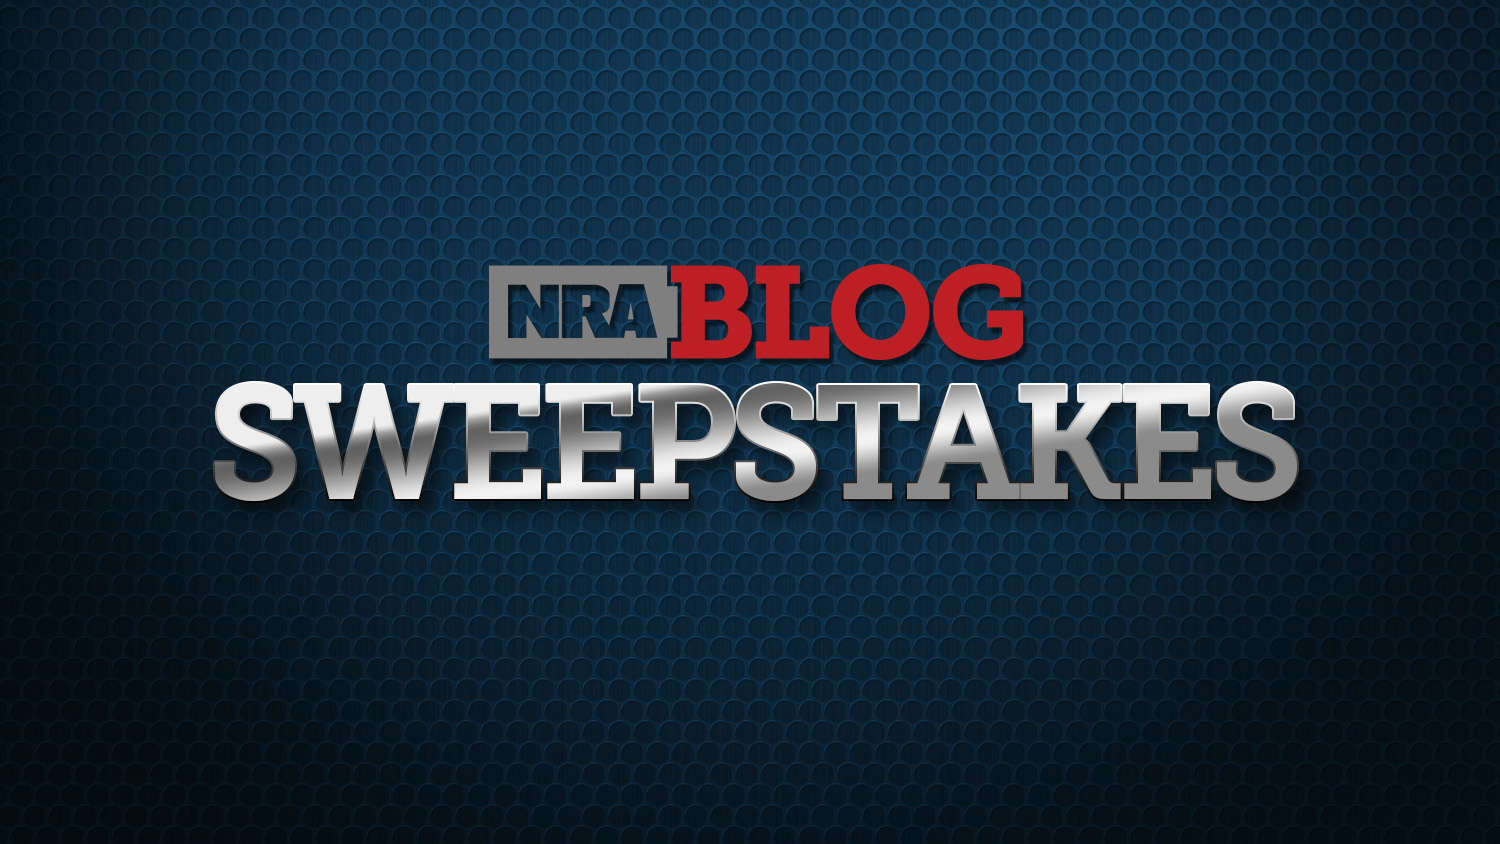 Enter To Win The May NRA Blog Sweepstakes